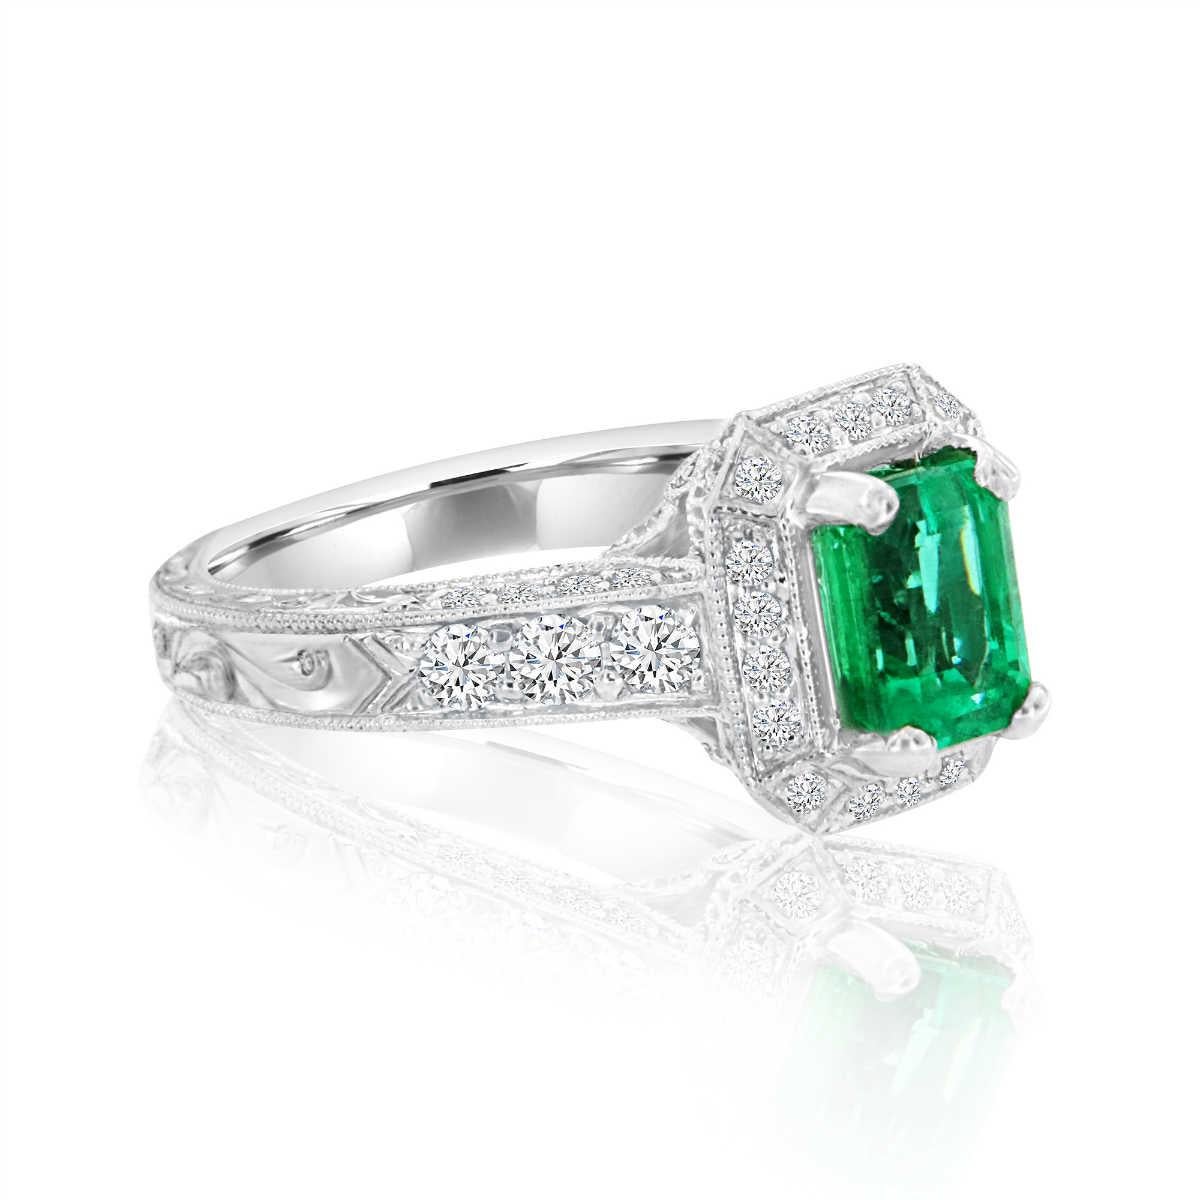 This vintage style stunning ring features one 1.43 carat Emerald Shape vibrant green emerald set in a halo-designed crown. This ring is luxurious with a hand touched details, from a delicate touch of milgrain design throughout the halo crown to